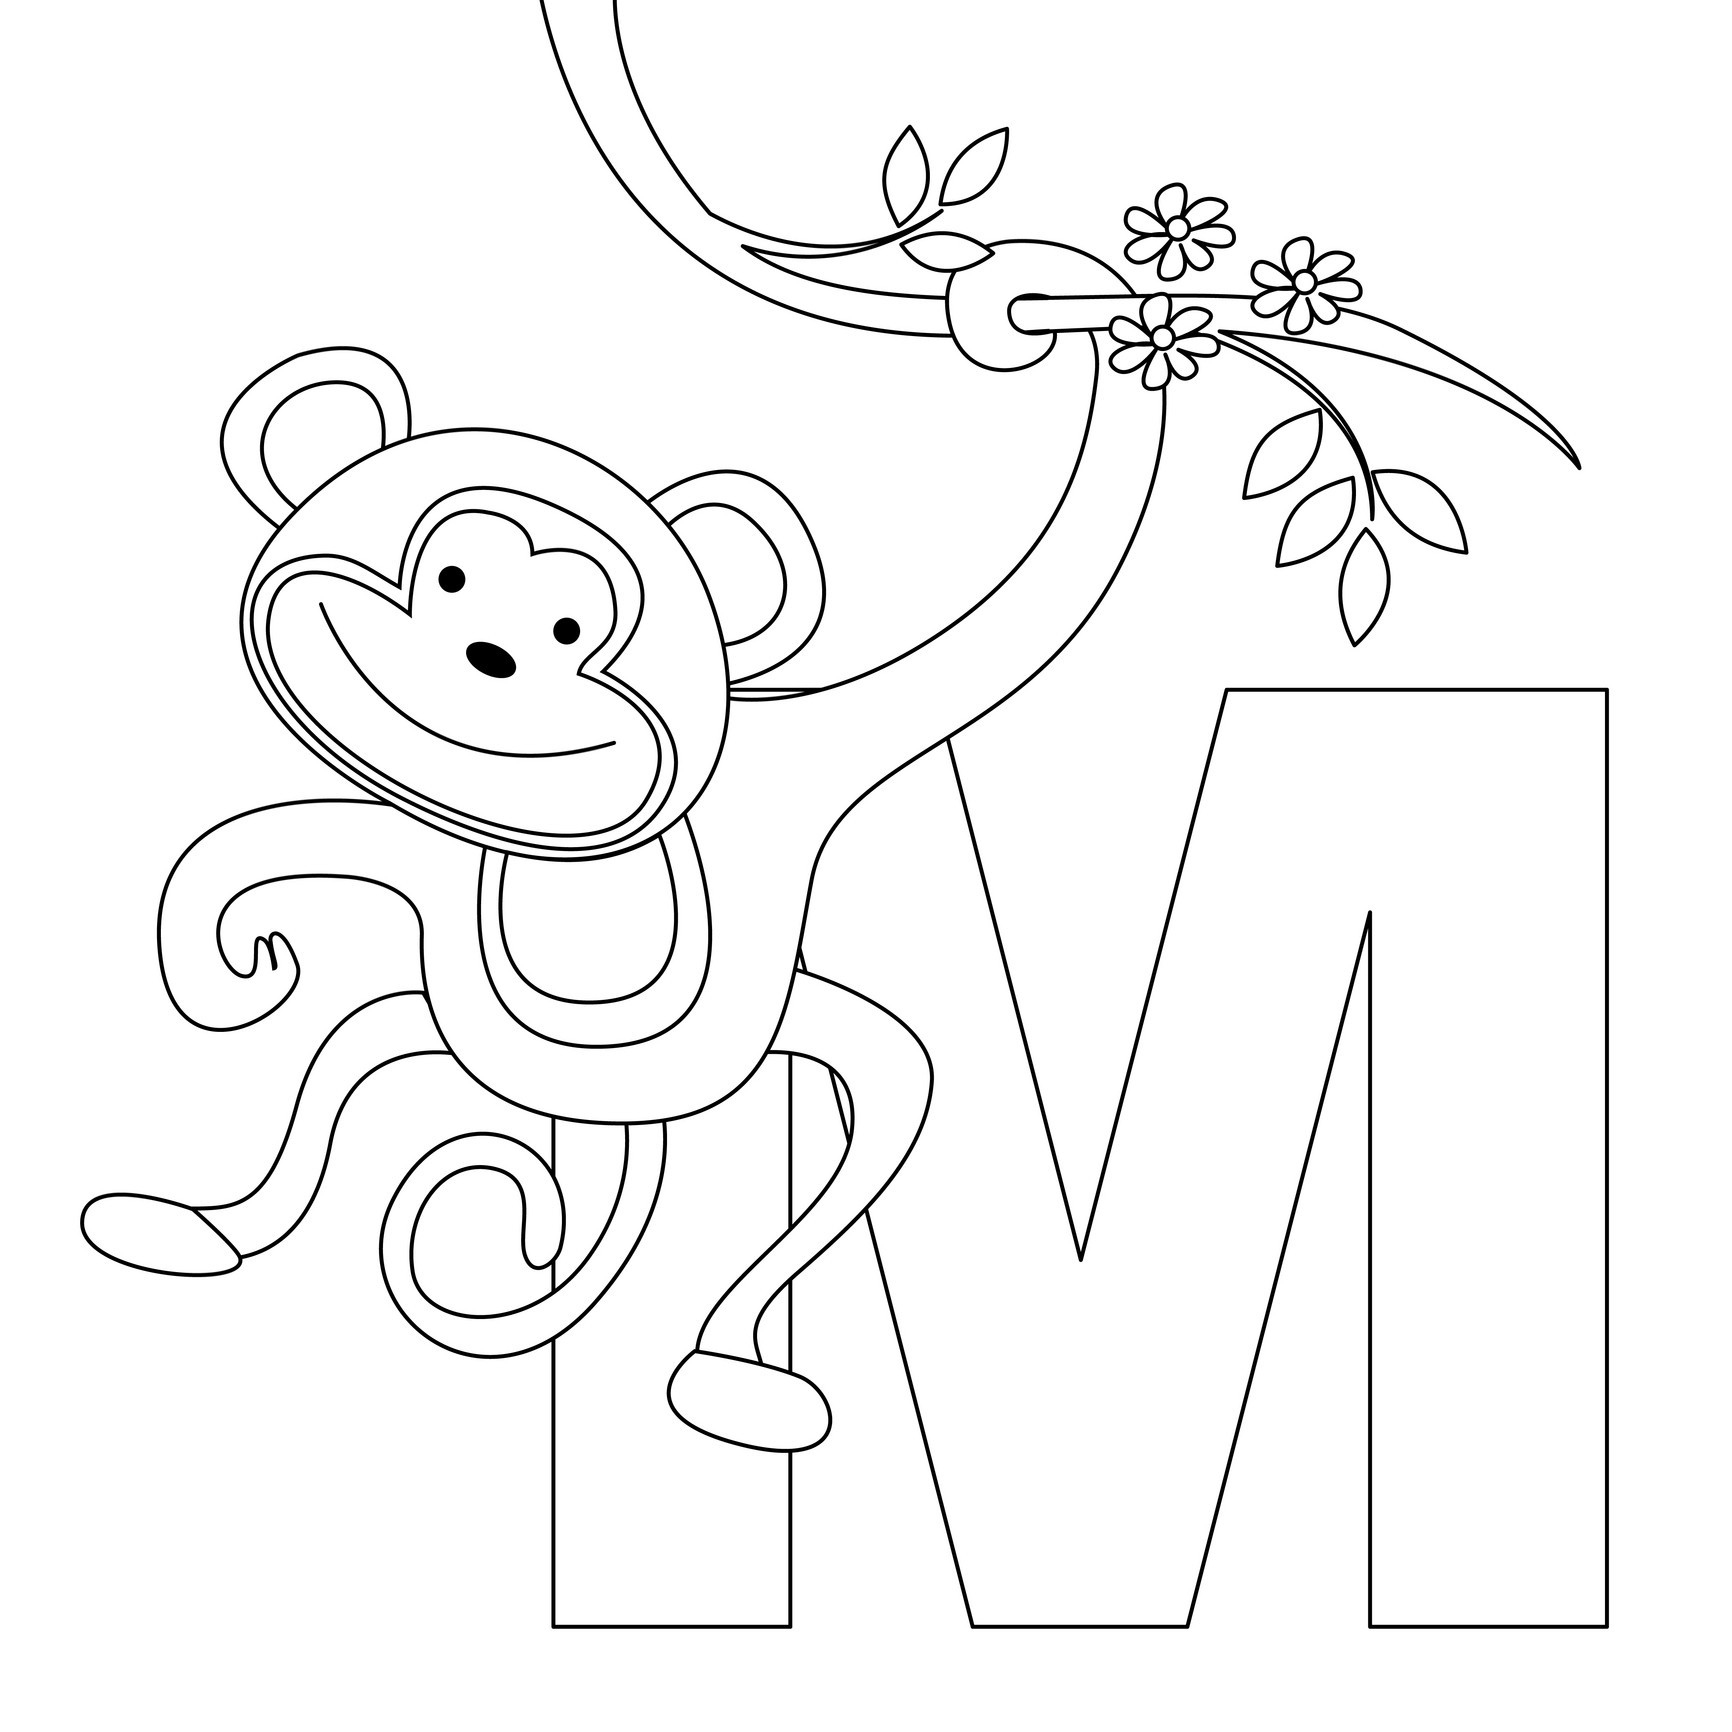 free-printable-alphabet-coloring-pages-alphabet-coloring-pages